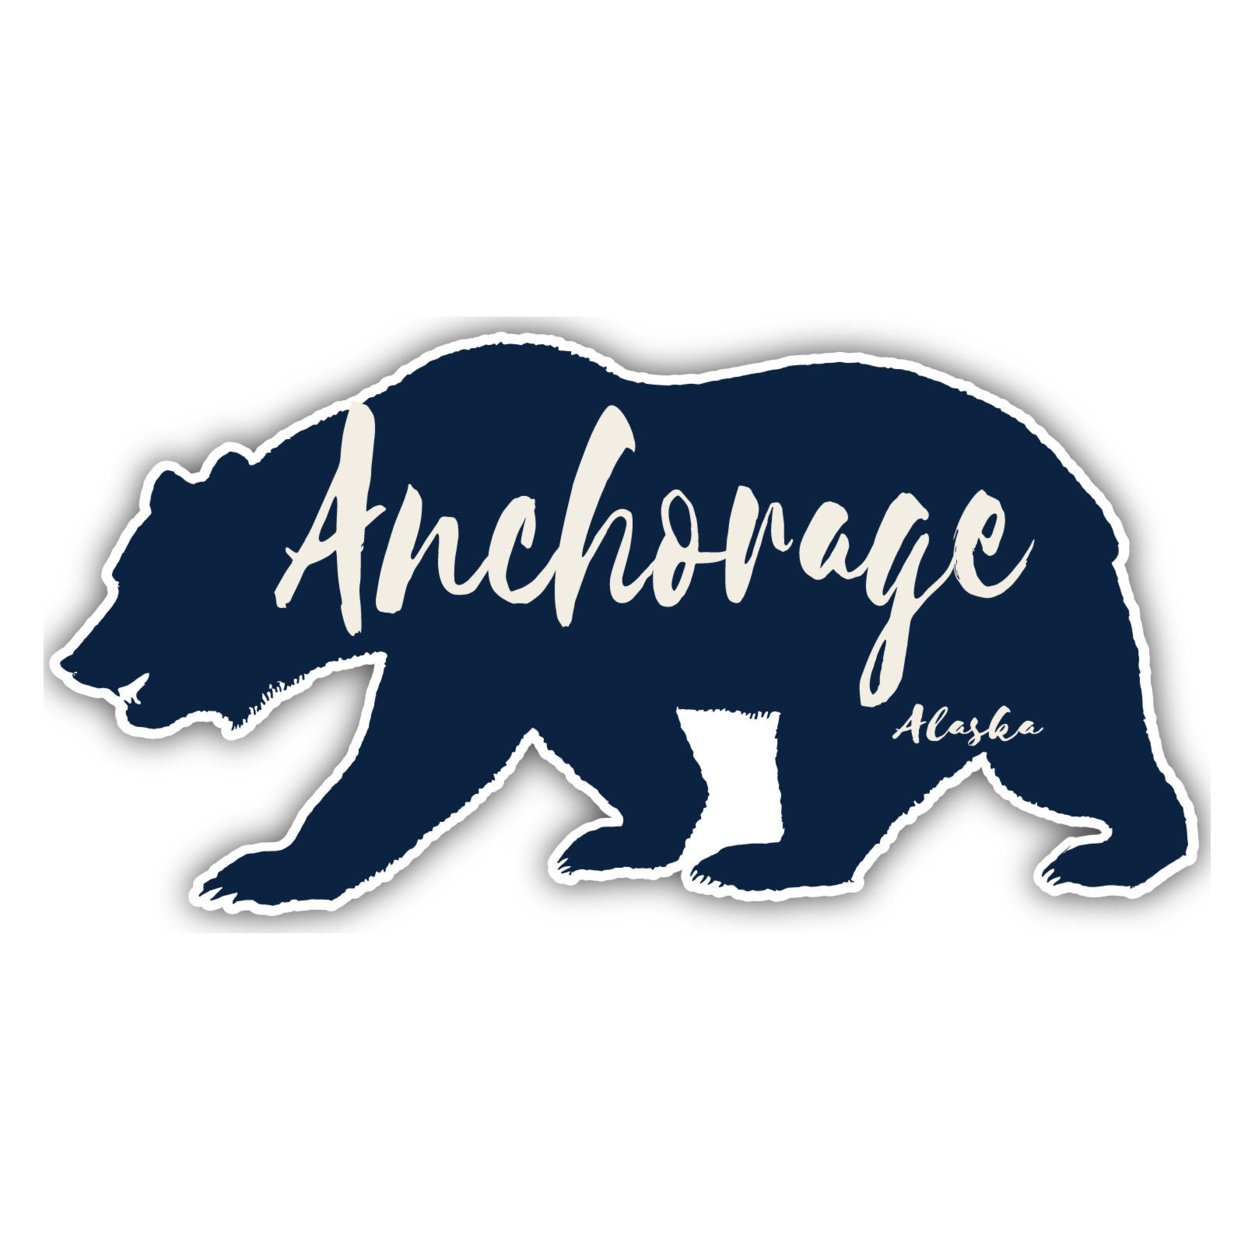 Anchorage Alaska Souvenir Decorative Stickers (Choose Theme And Size) - Single Unit, 4-Inch, Great Outdoors